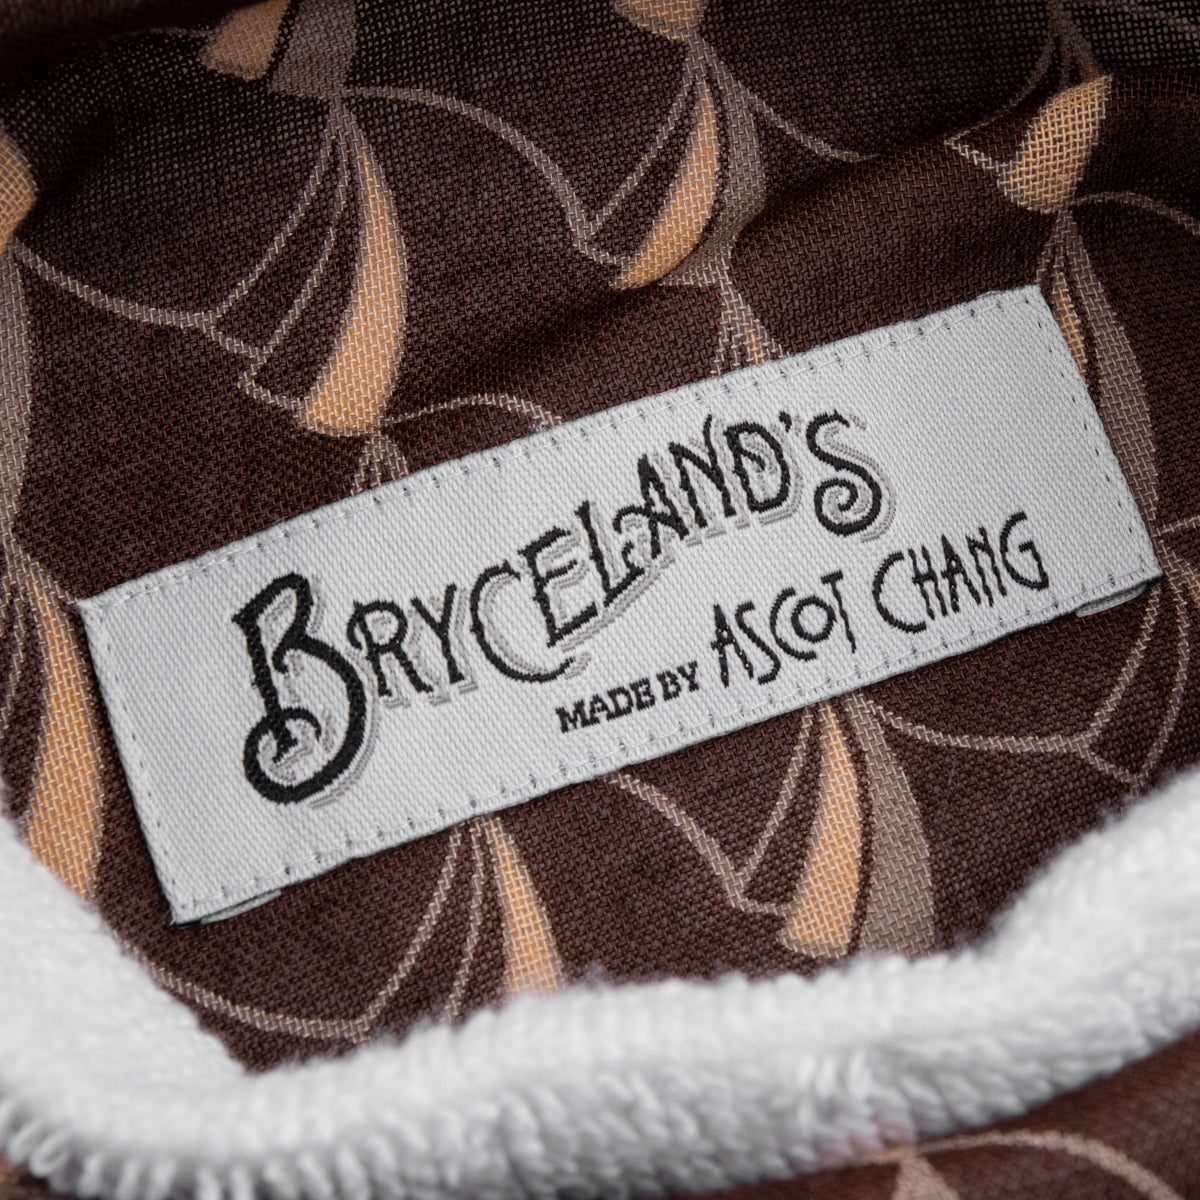 Bryceland's Co Towel Shirt - Brunette Brown Extra Large